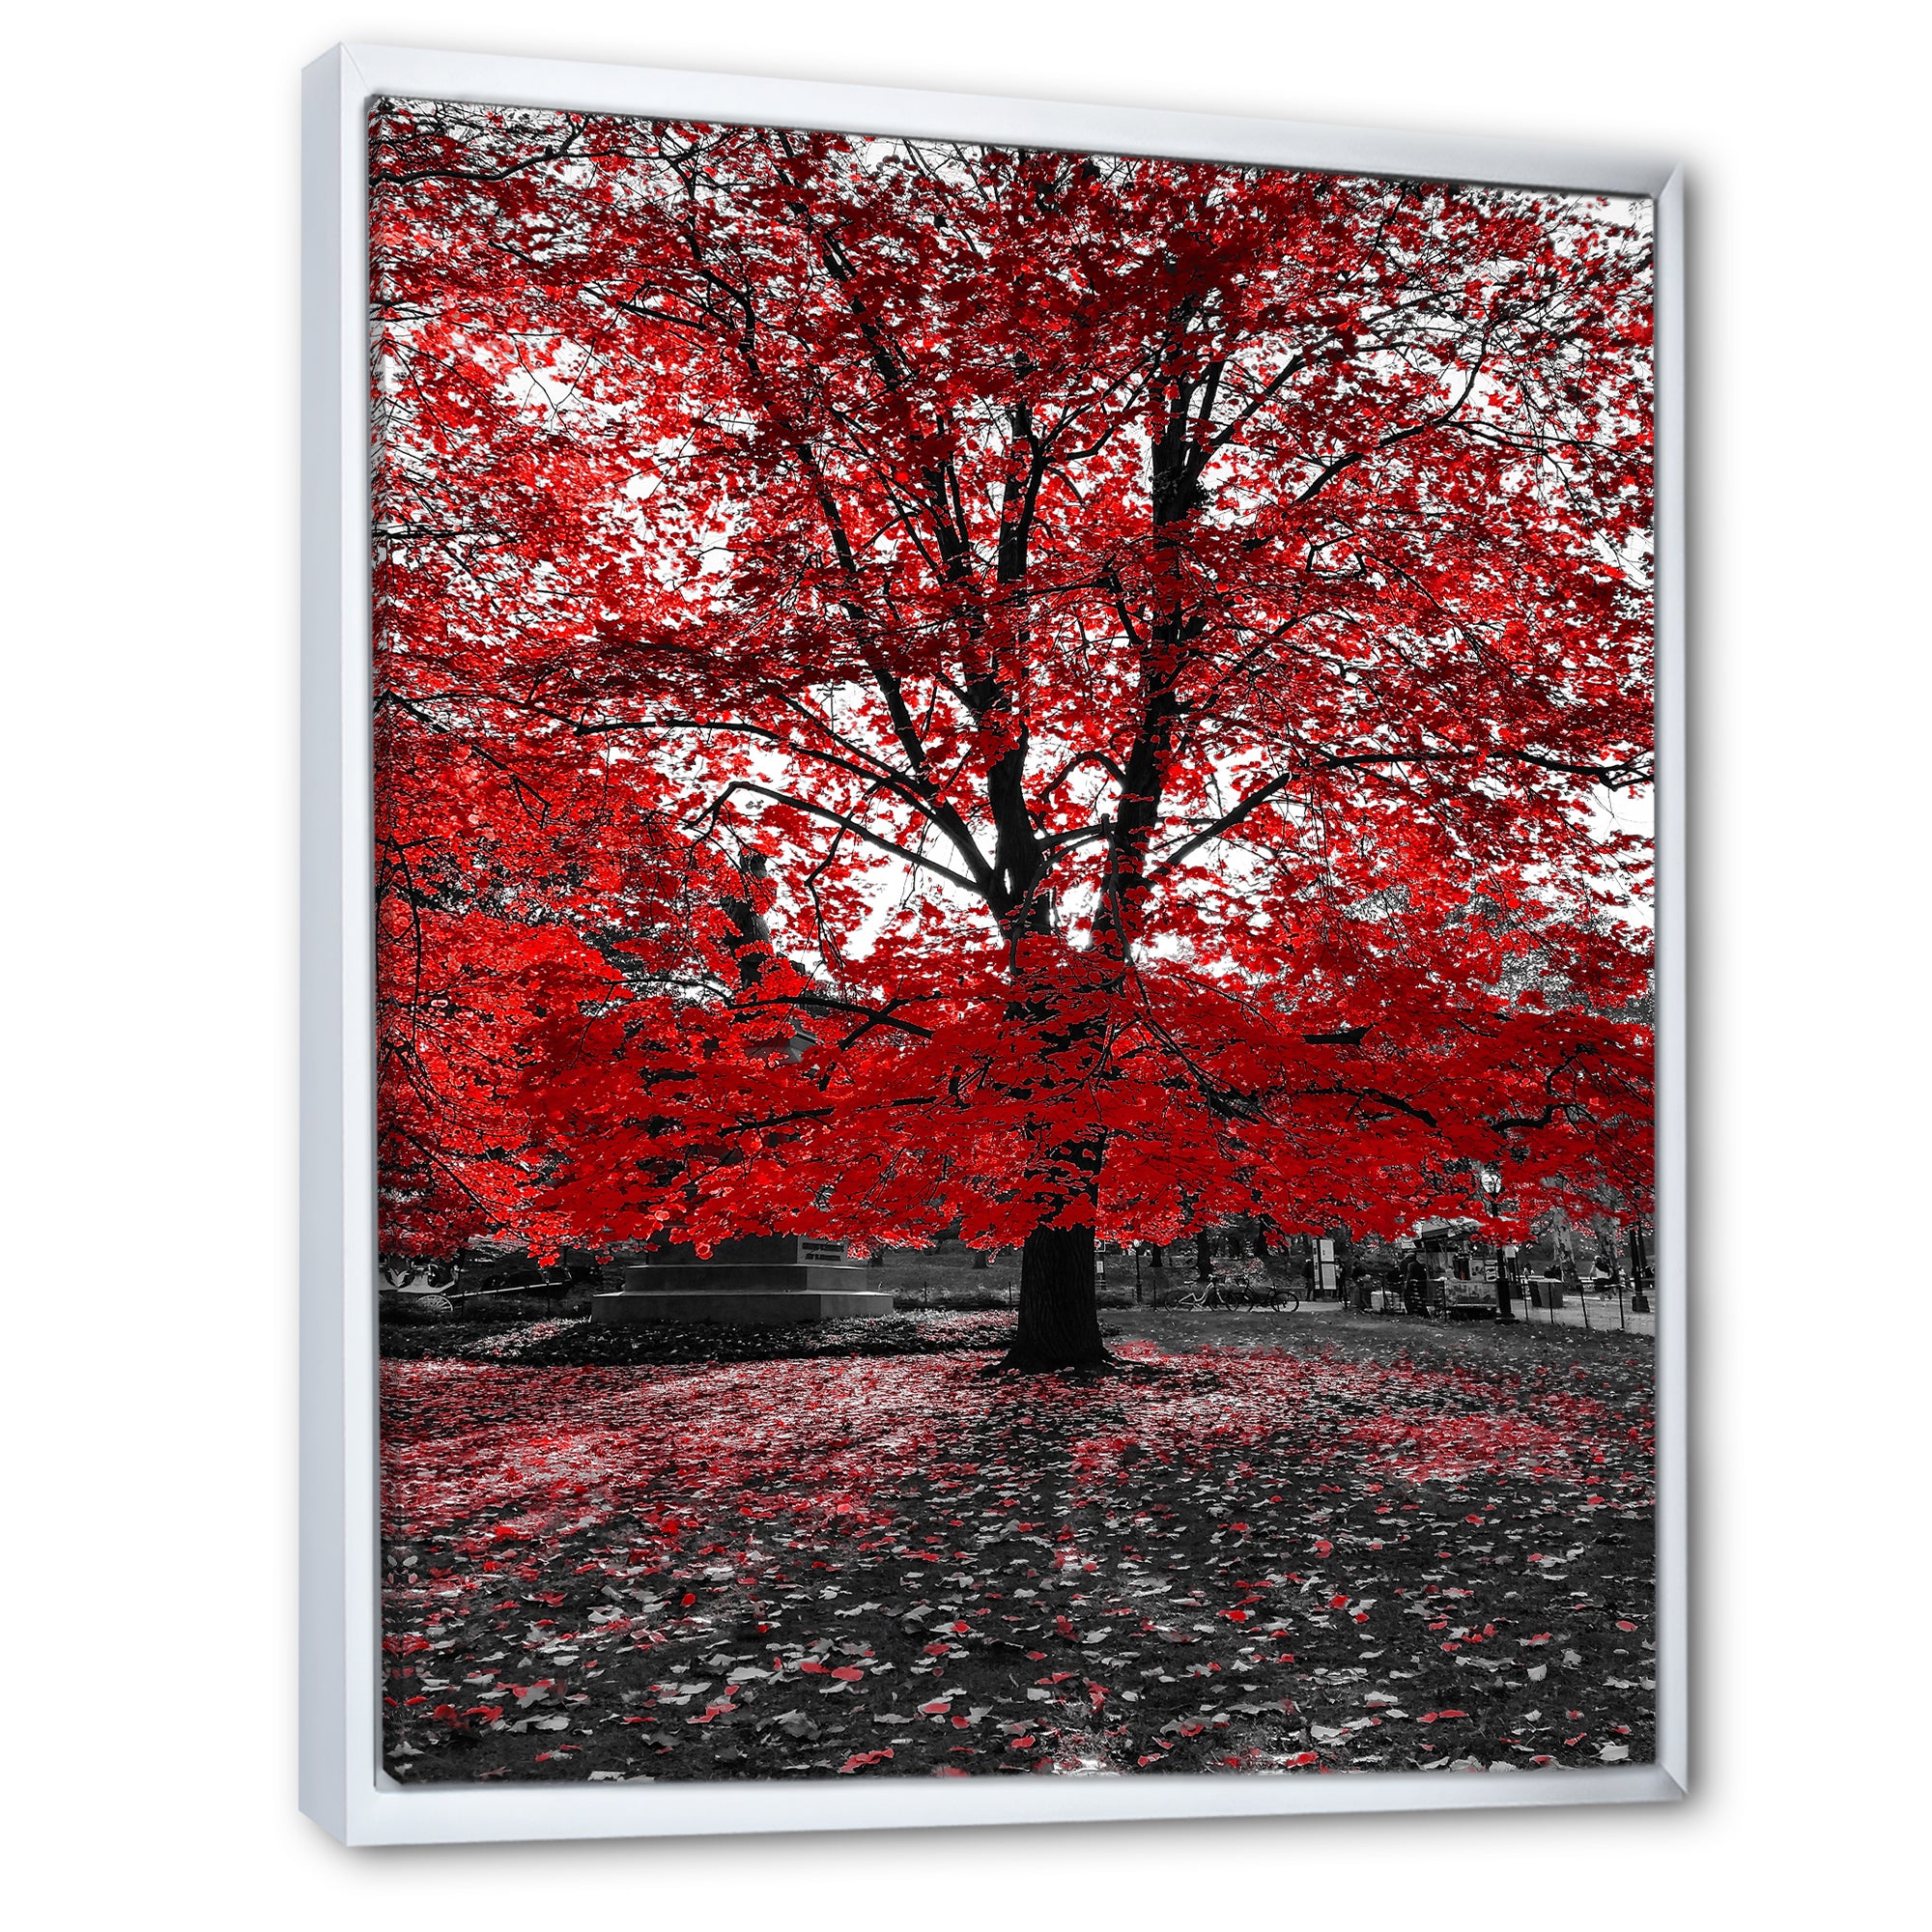 Red Tree in Central Park